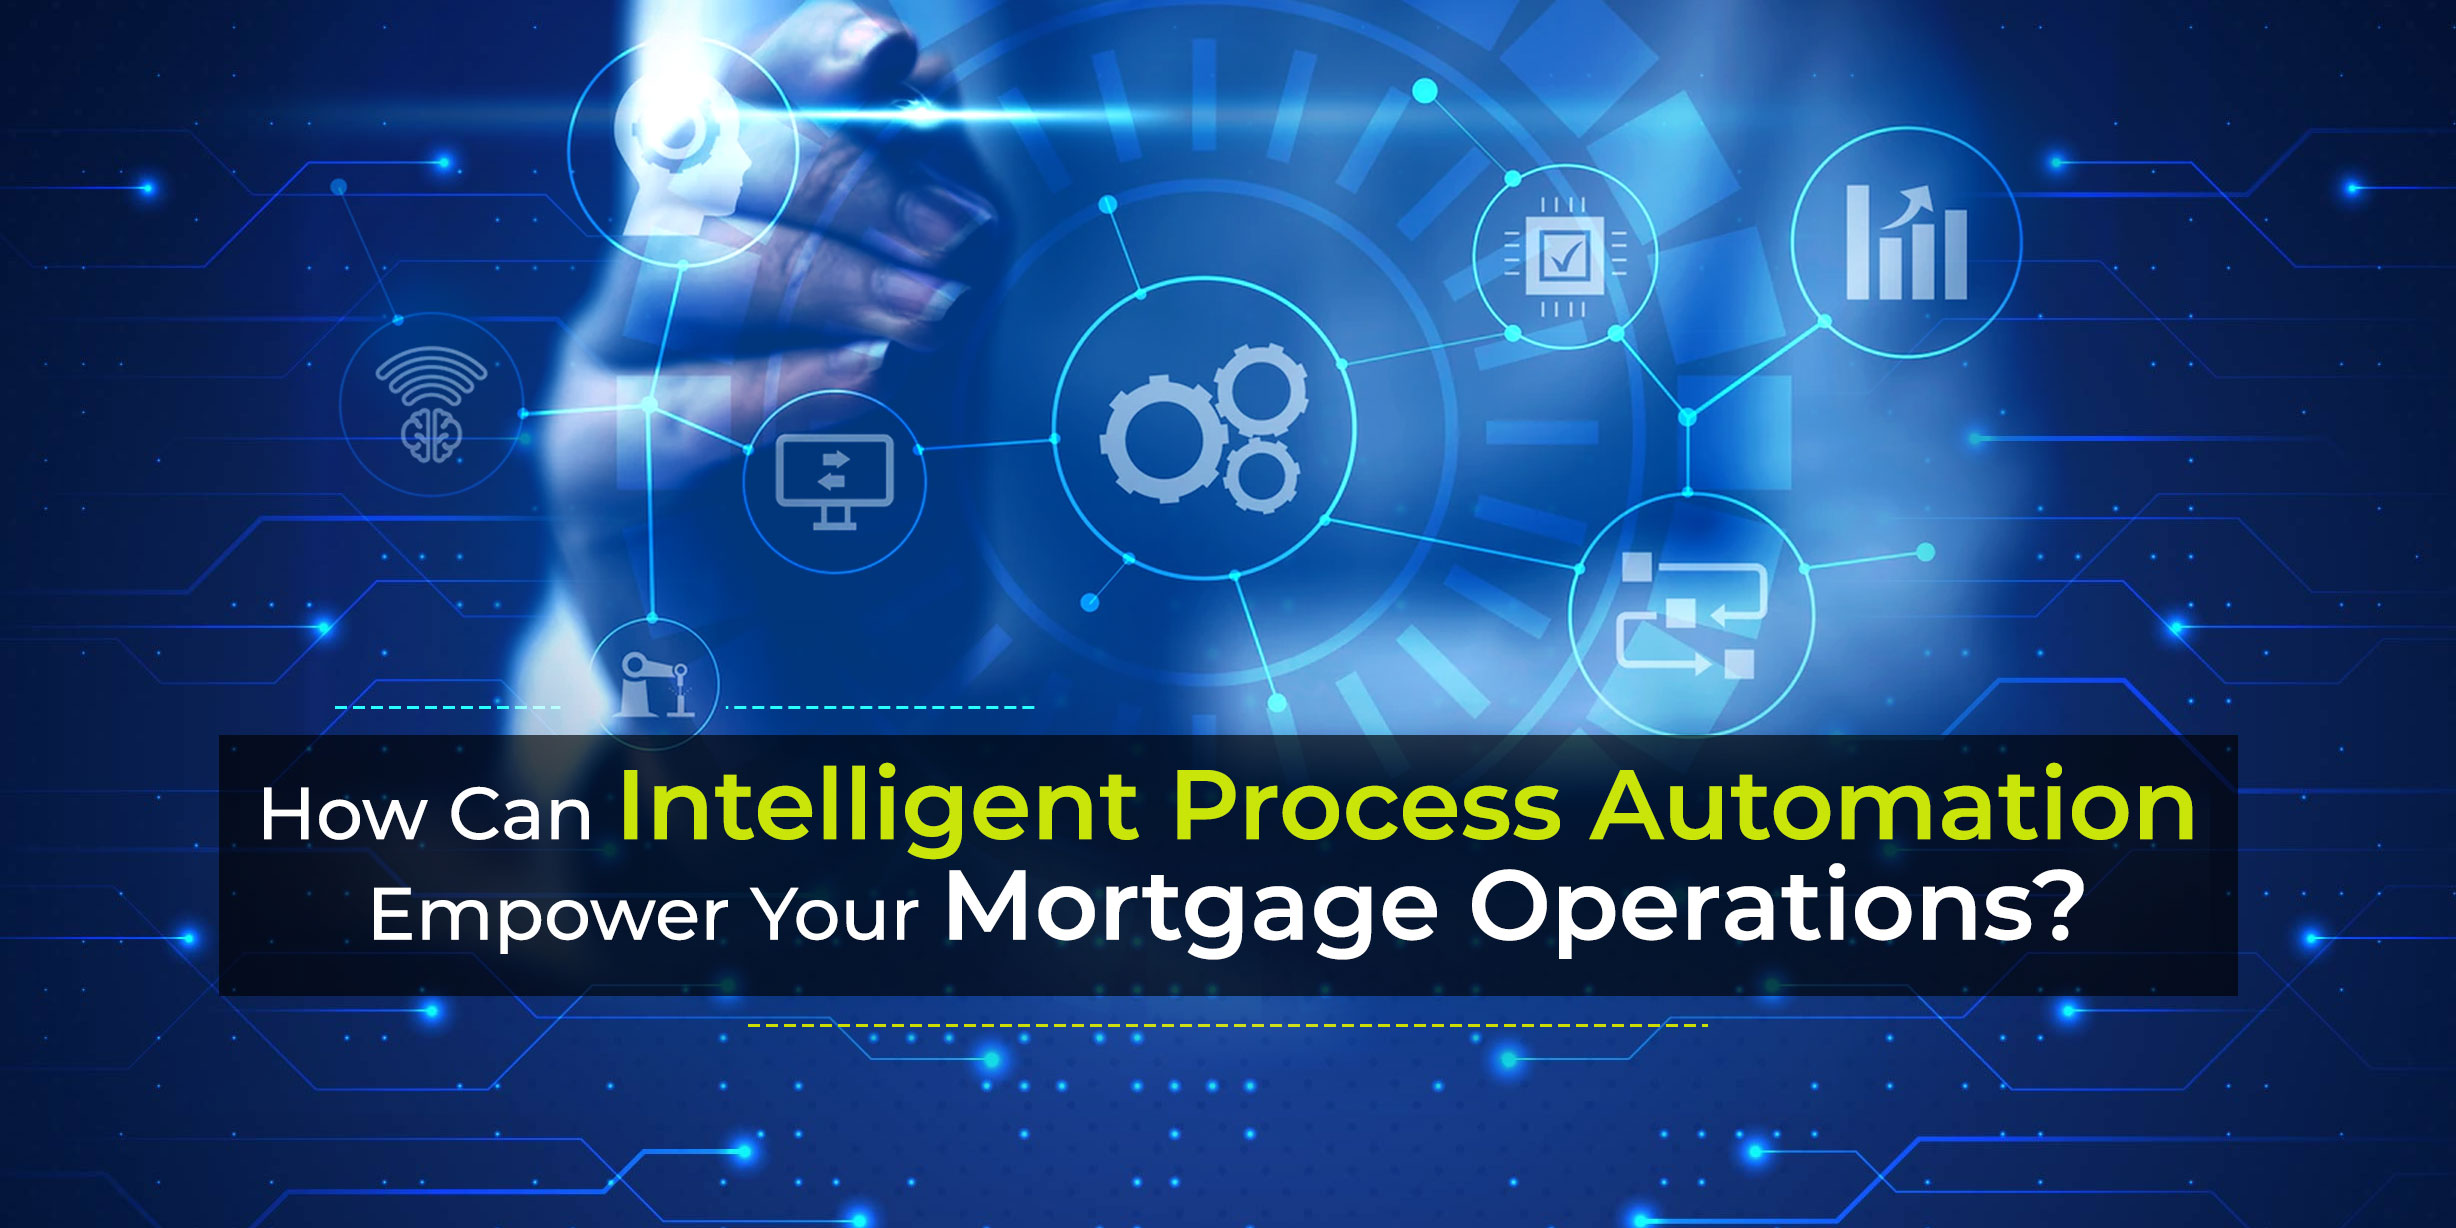 How Can Intelligent Process Automation Empower Your Mortgage Operations